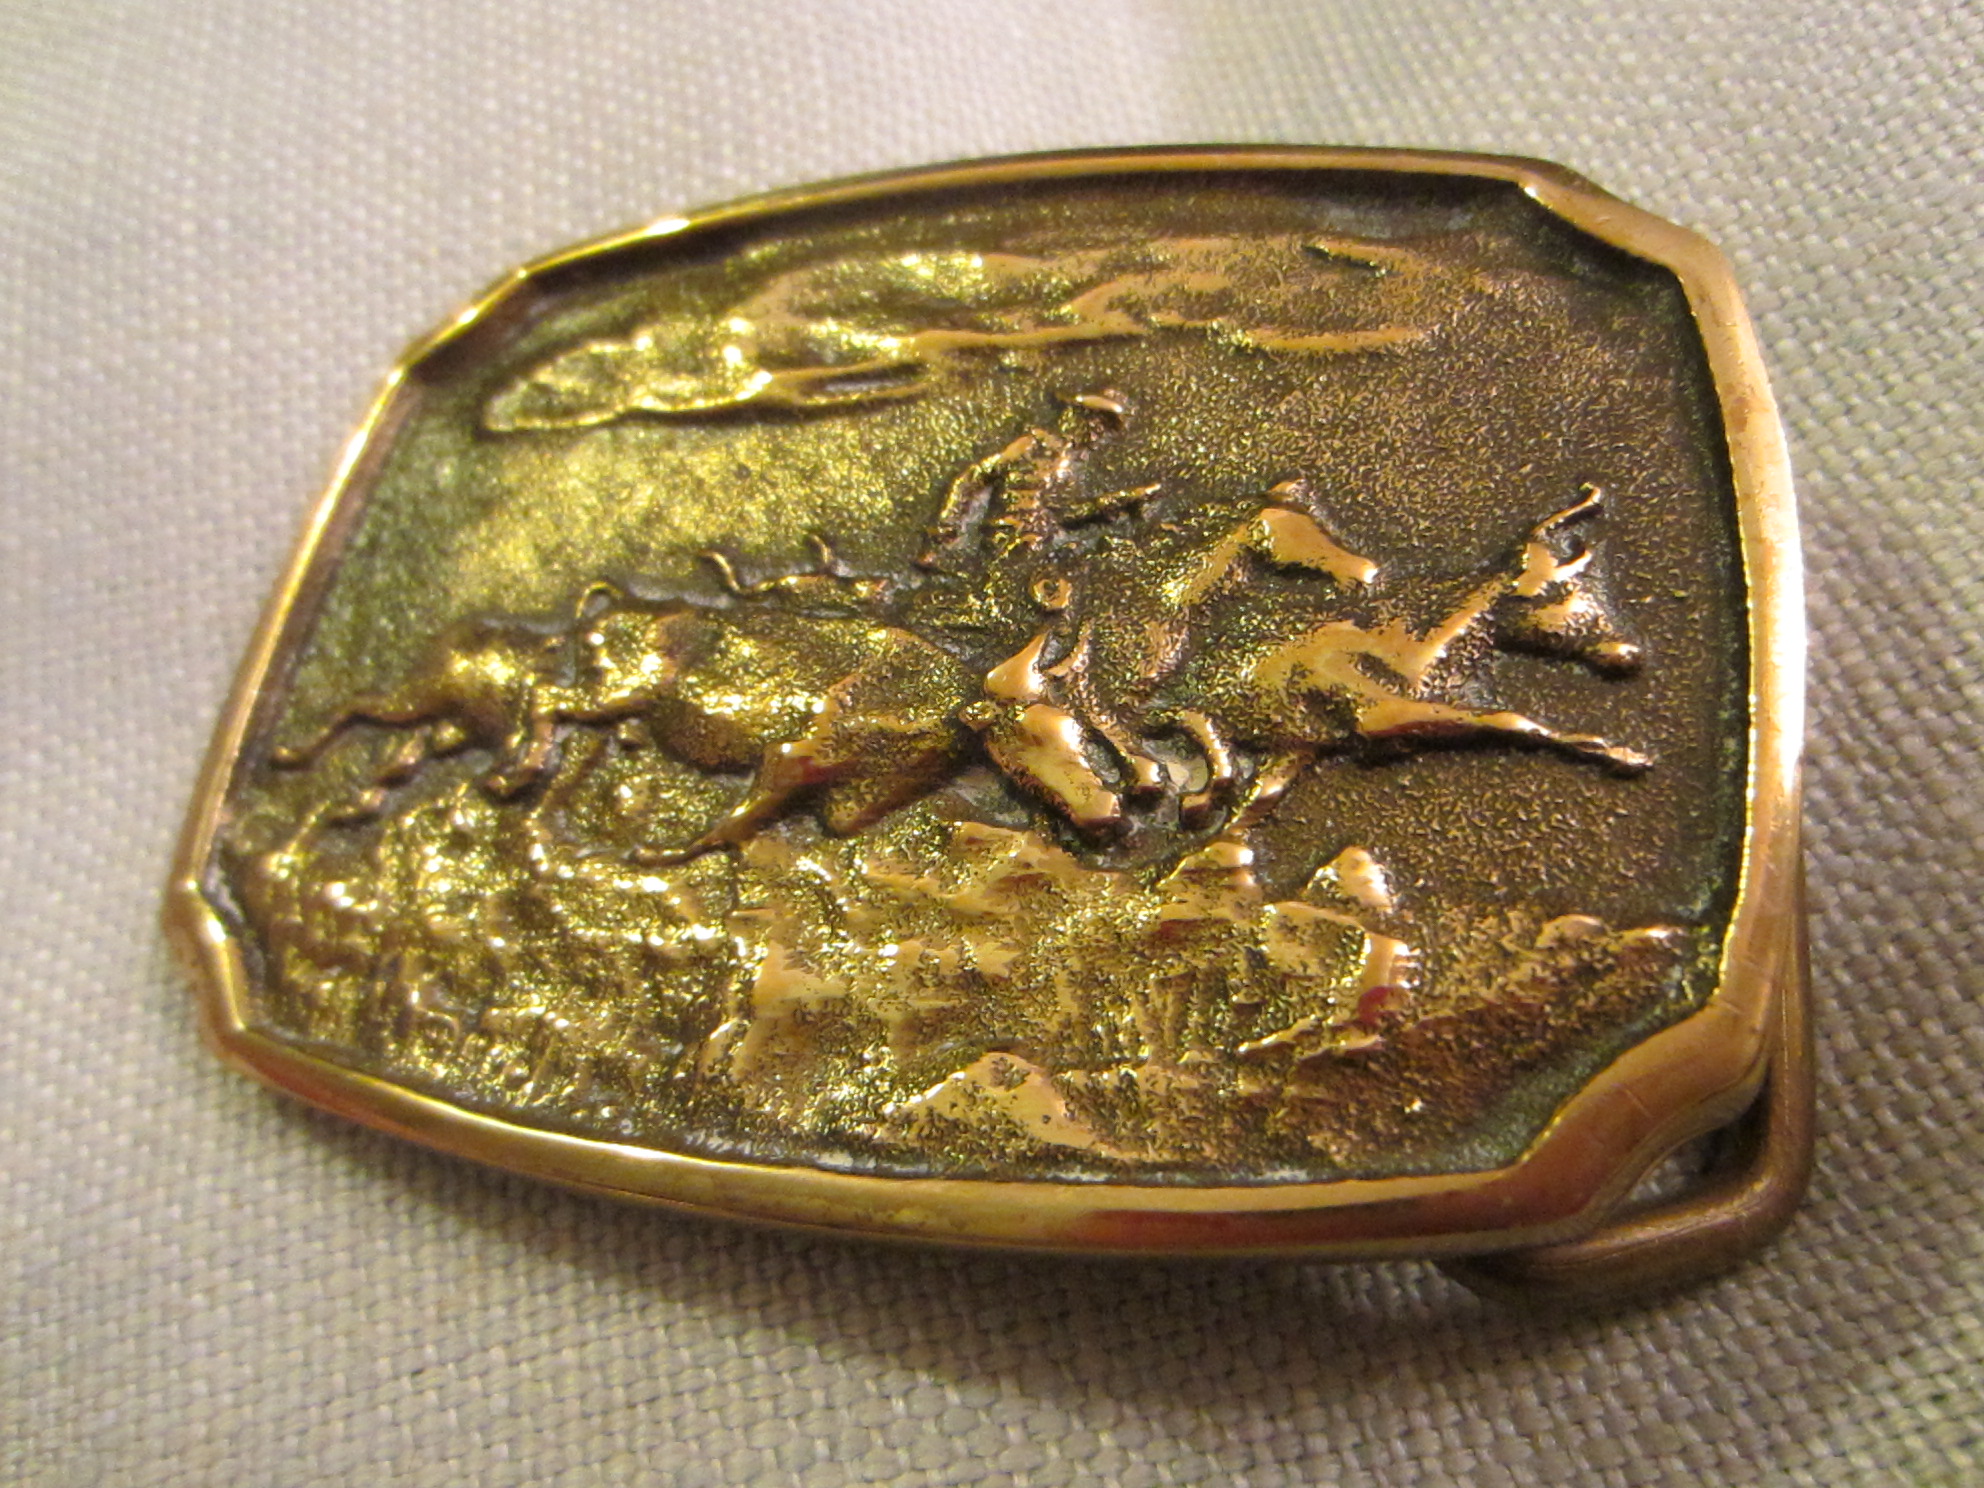 Old Belt Buckles For Sale | Literacy Ontario Central South